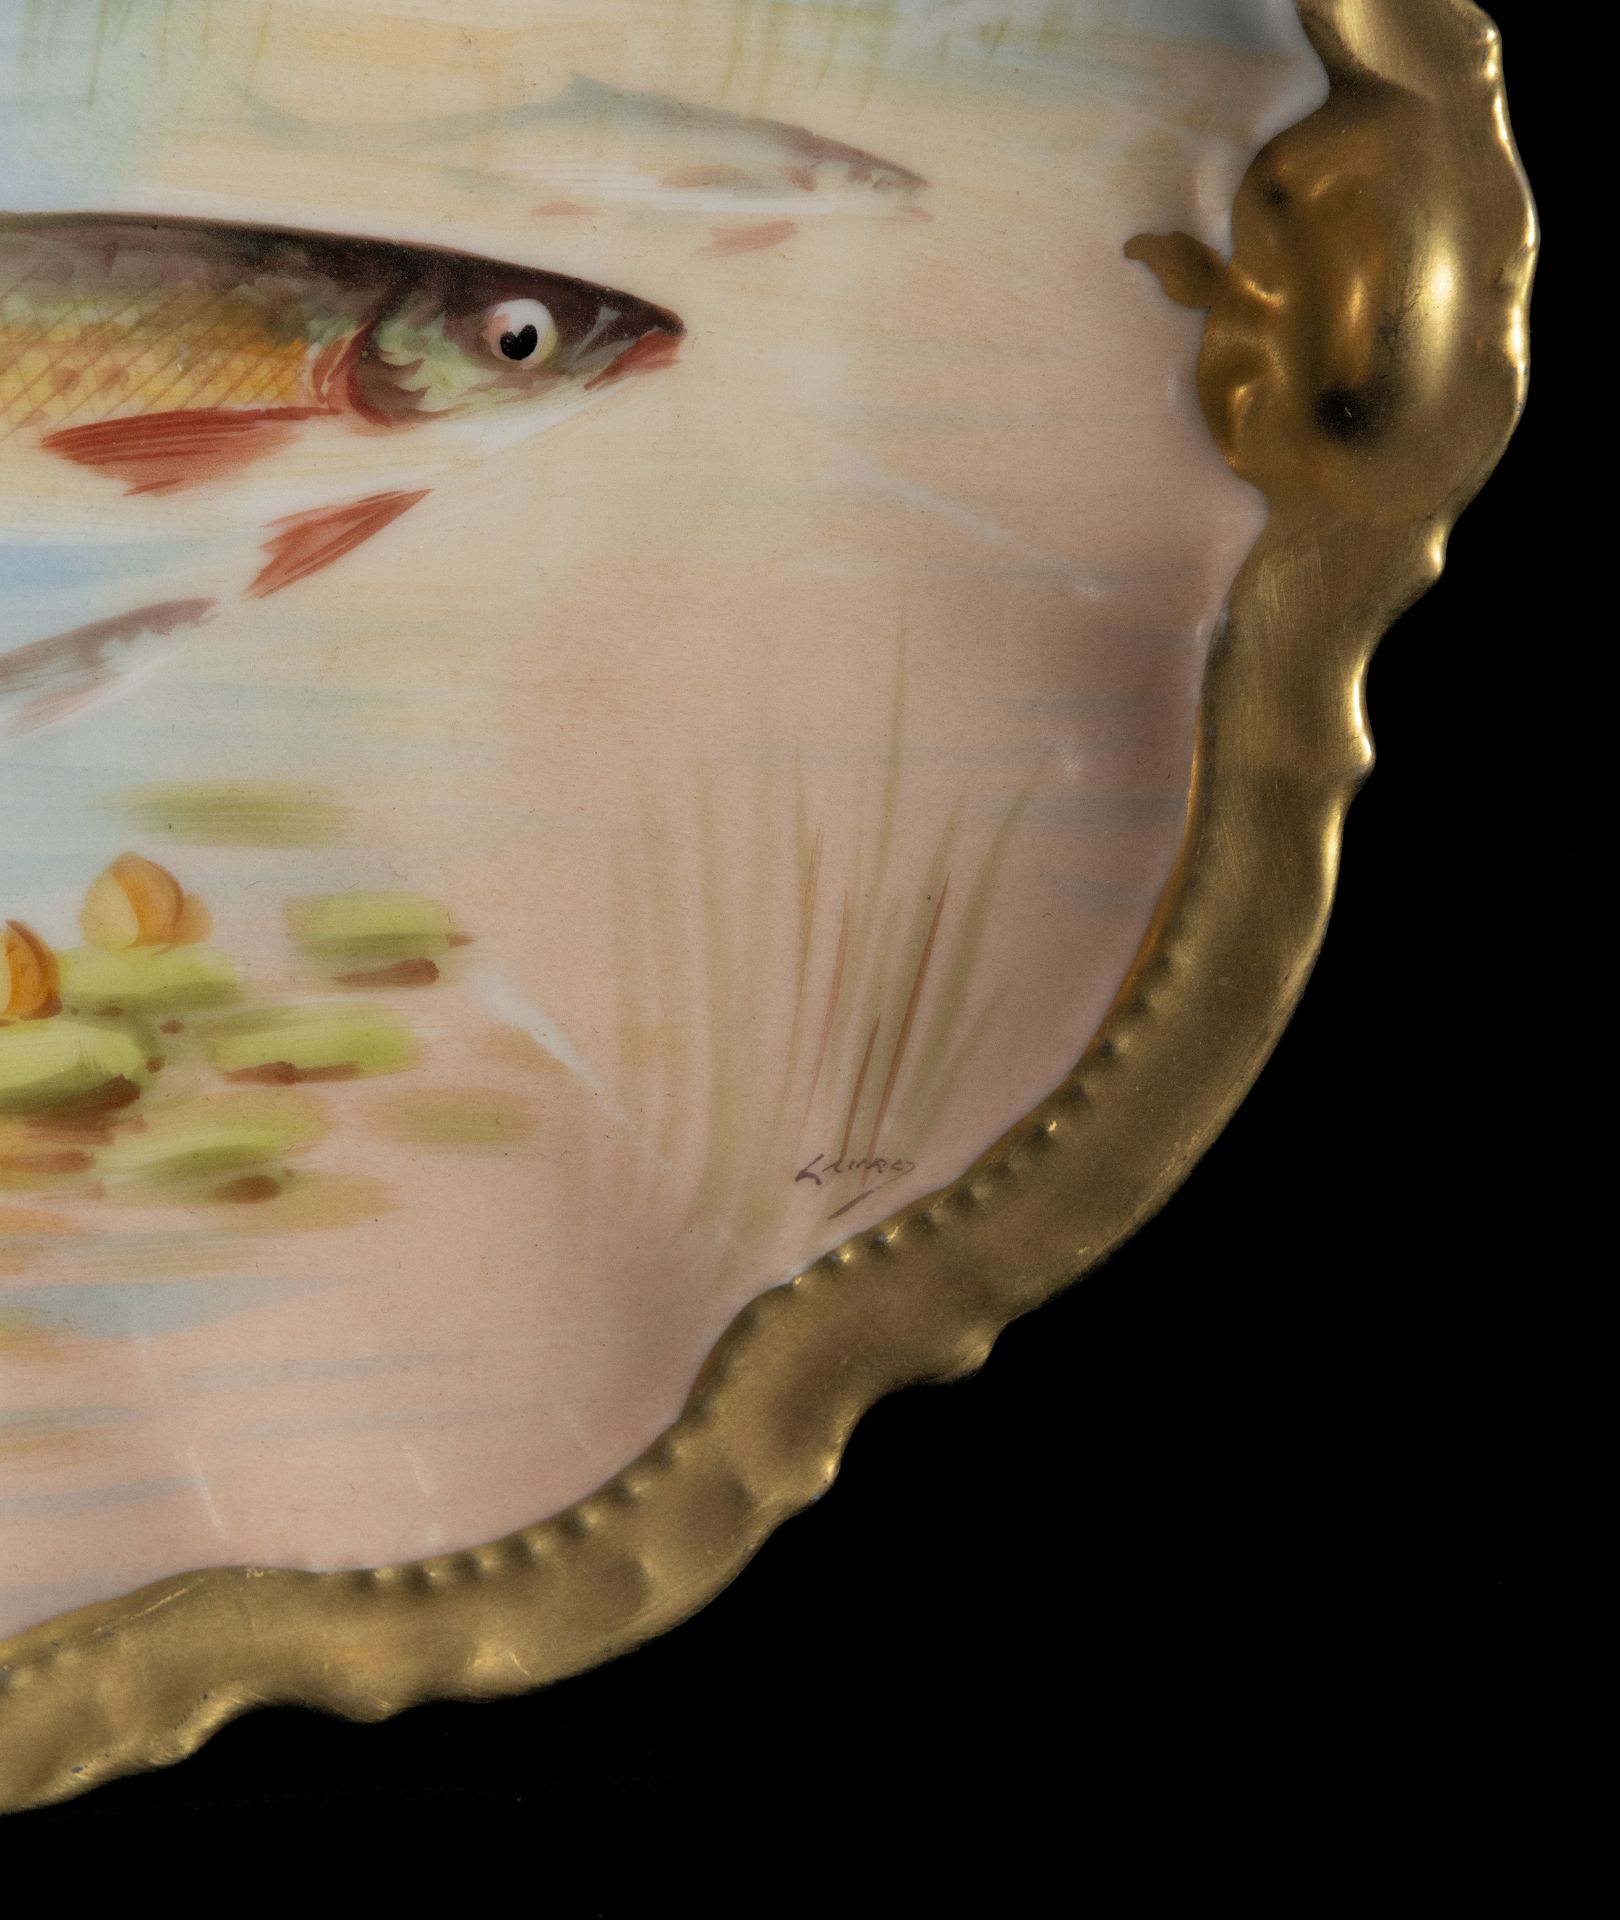 19th Century Limoges Porcelain Fish Dinnerware Set by the Count of Artois, 19th Century - Image 5 of 12